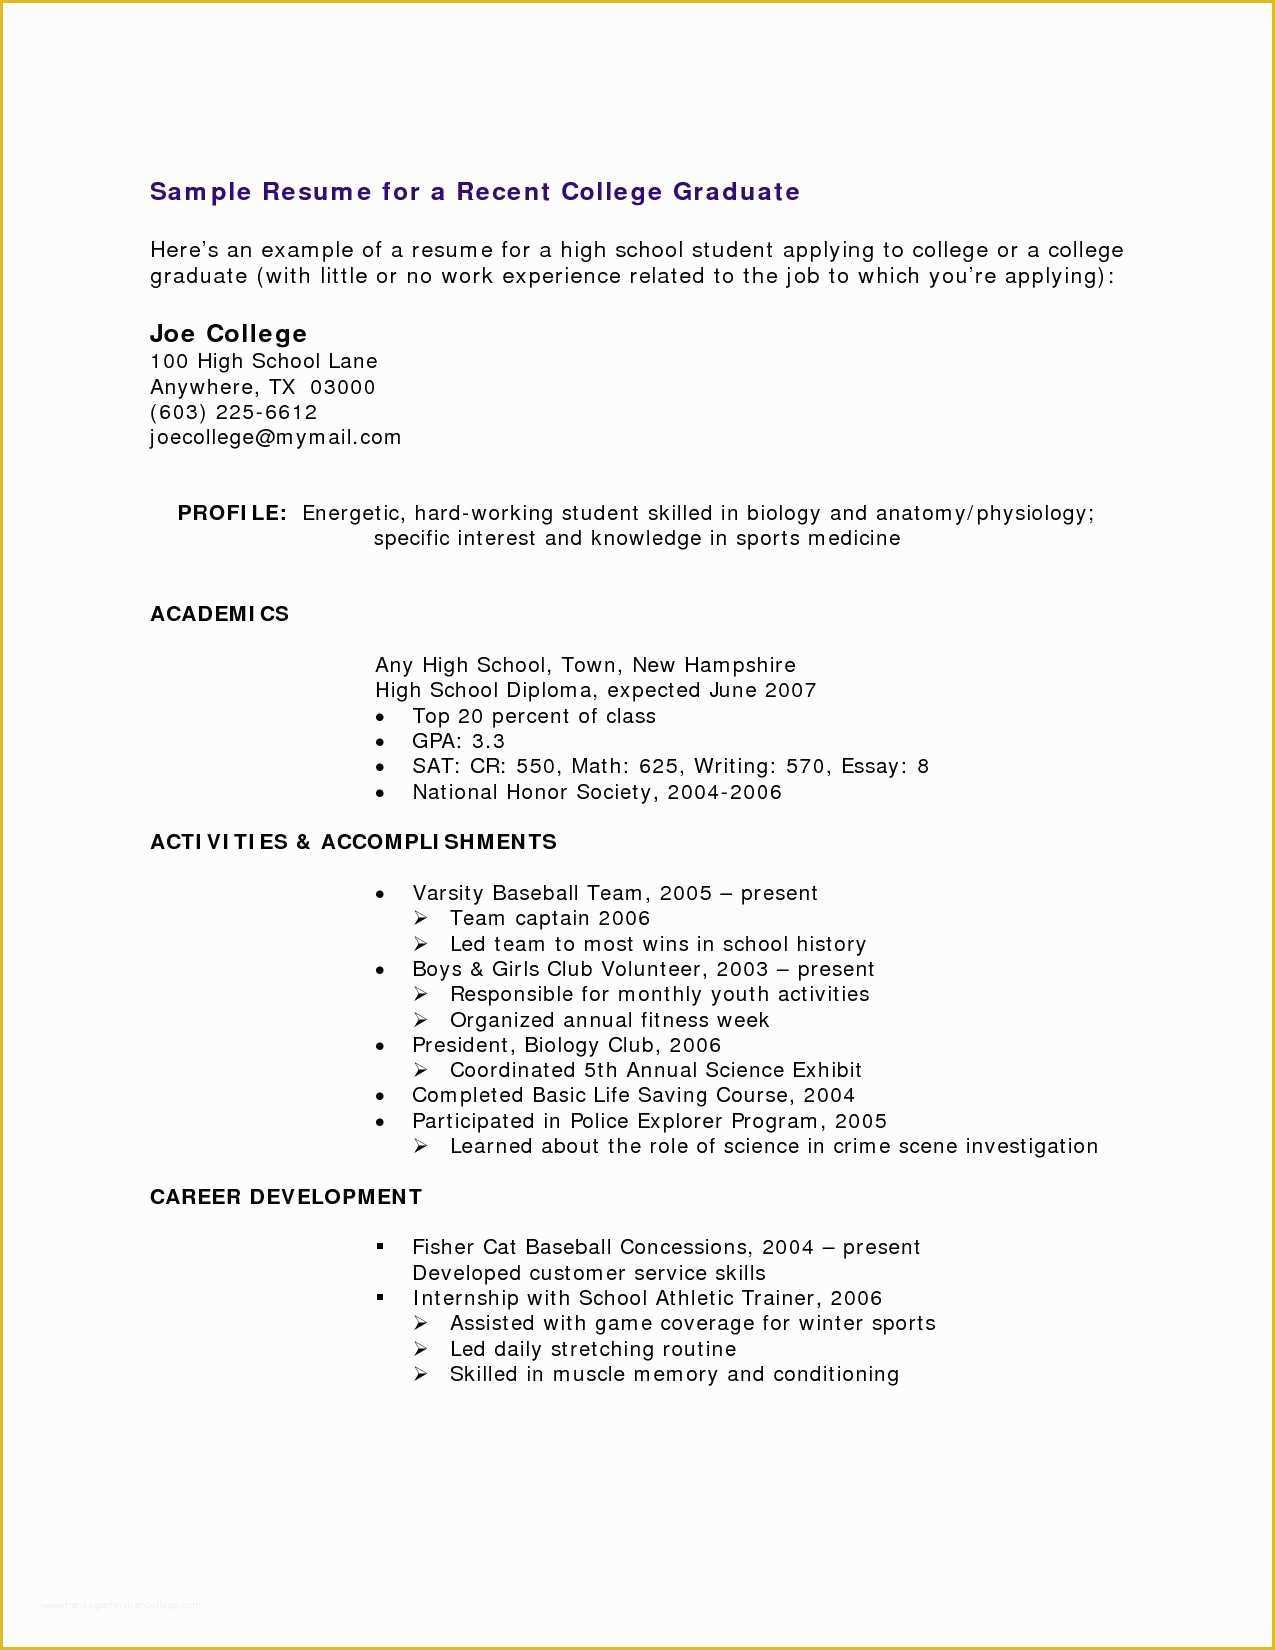 Free Resume Templates for No Work Experience Of Free Resume Templates No Work Experience